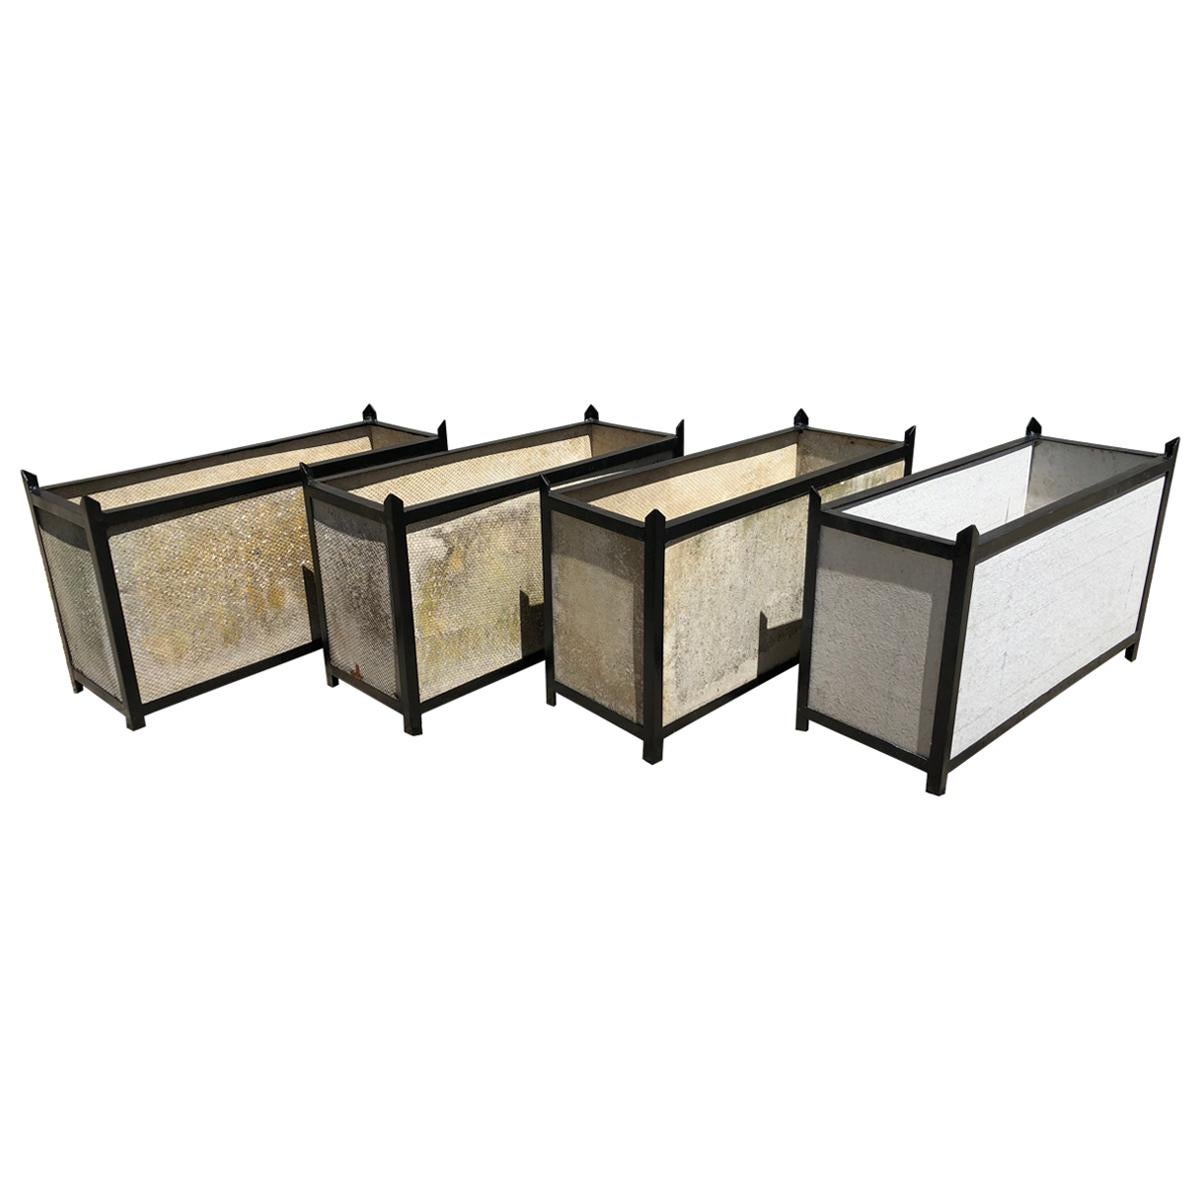 Very Rare Set of Four Rectangular Steel Framed Planters by Willy Guhl